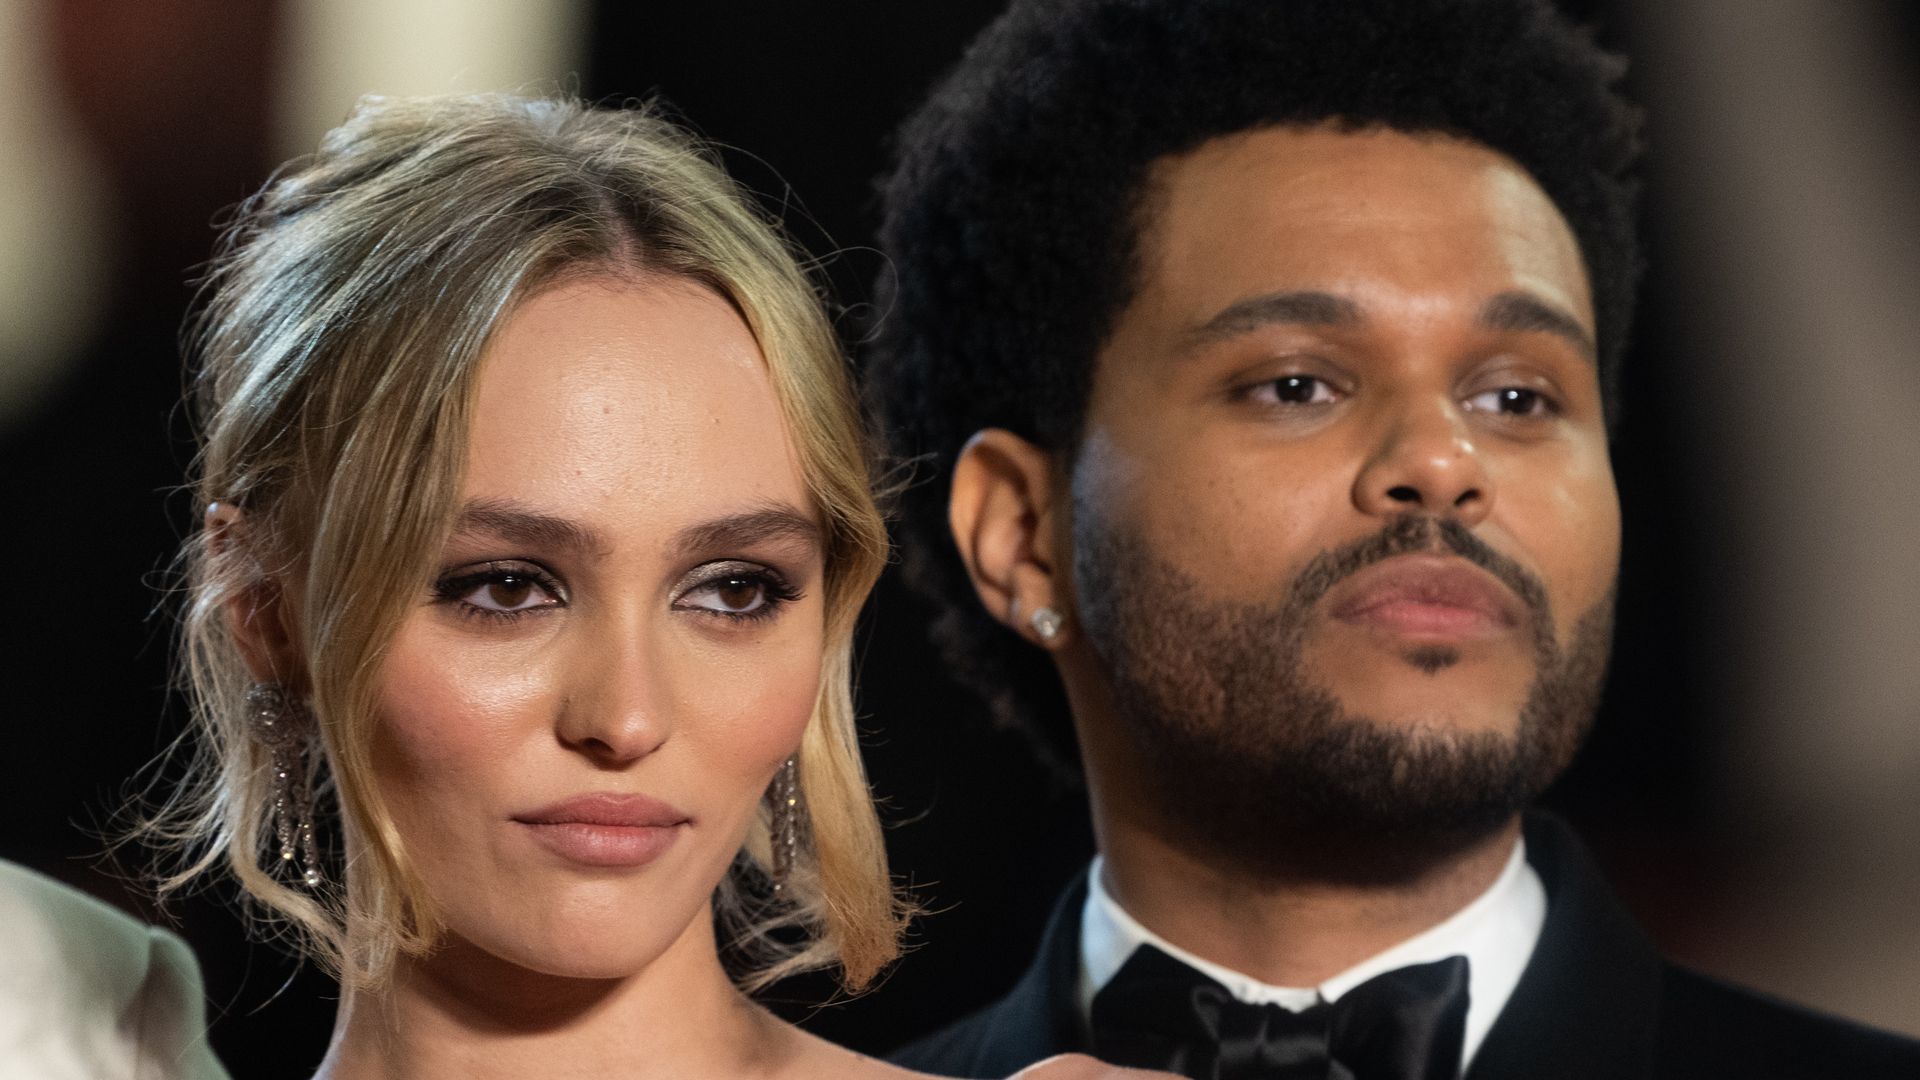 CANNES, FRANCE - MAY 22: Lily-Rose Depp and Abel Makkonen Tesfaye, The Weeknd attend the "The Idol" red carpet during the 76th annual Cannes film festival